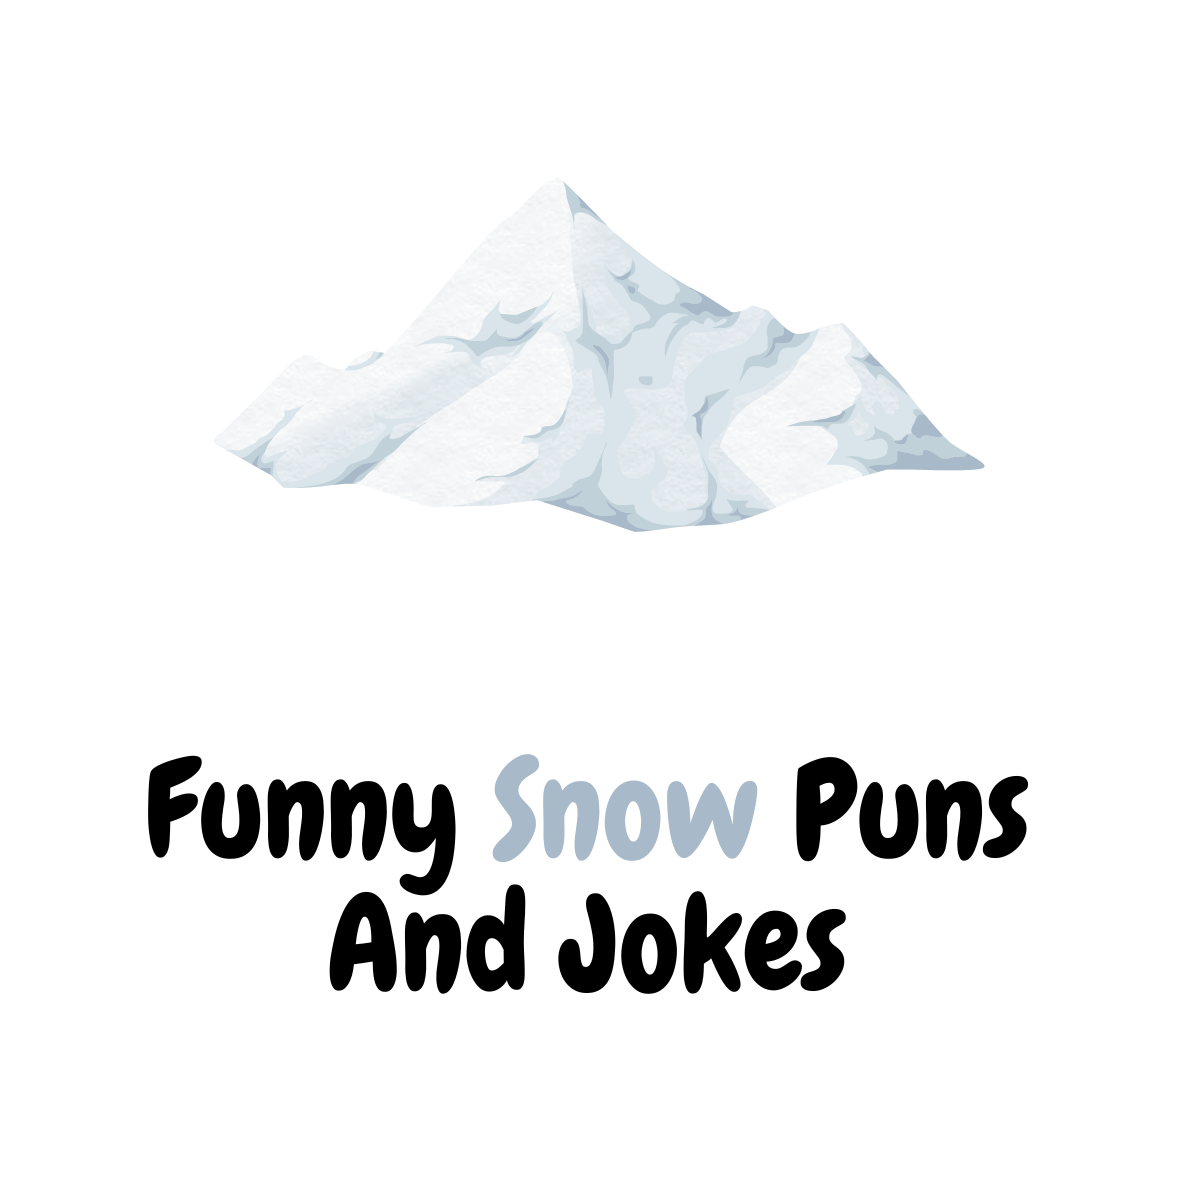 Funny Snow Puns And Jokes